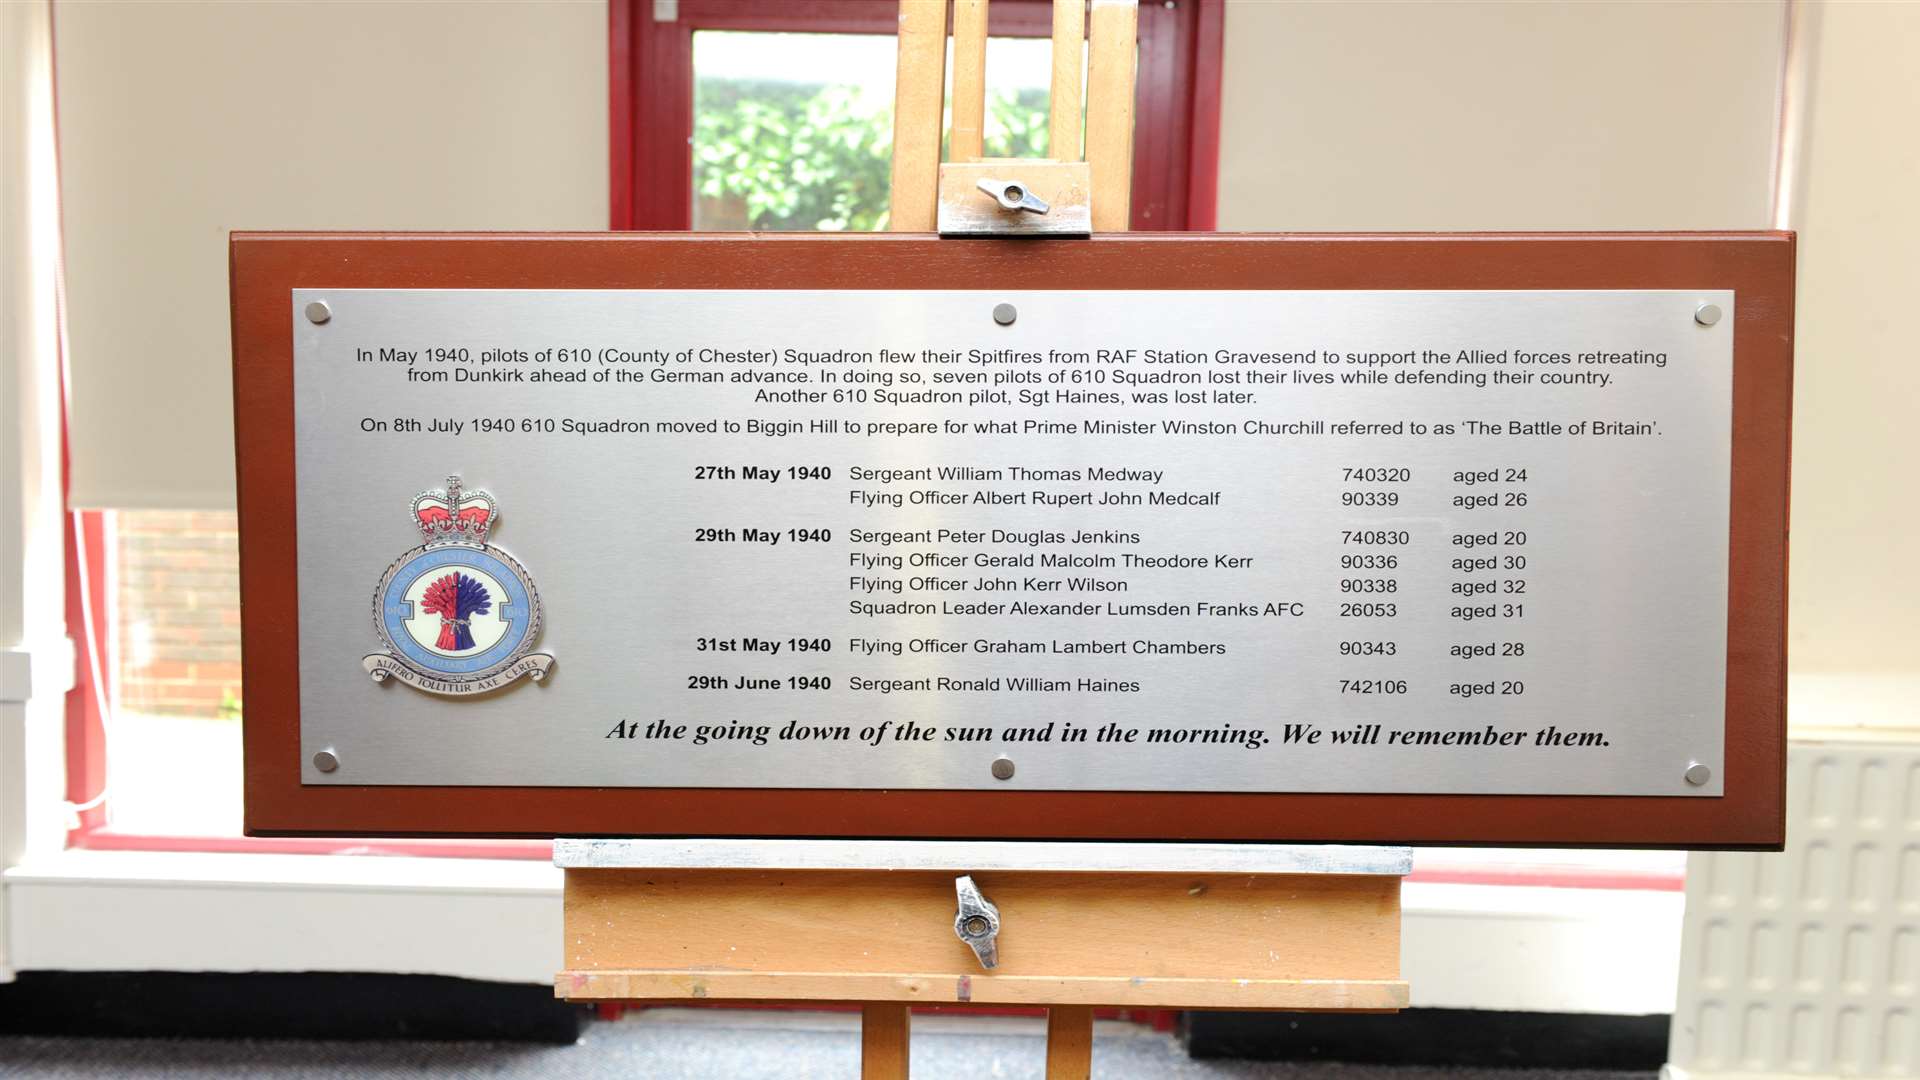 The plaque commemorating the men of 610 (County of Chester) Squadron Royal Auxiliary Air Force, who were based at RAF Gravesend Airport before fighting in the retreat at Dunkirk